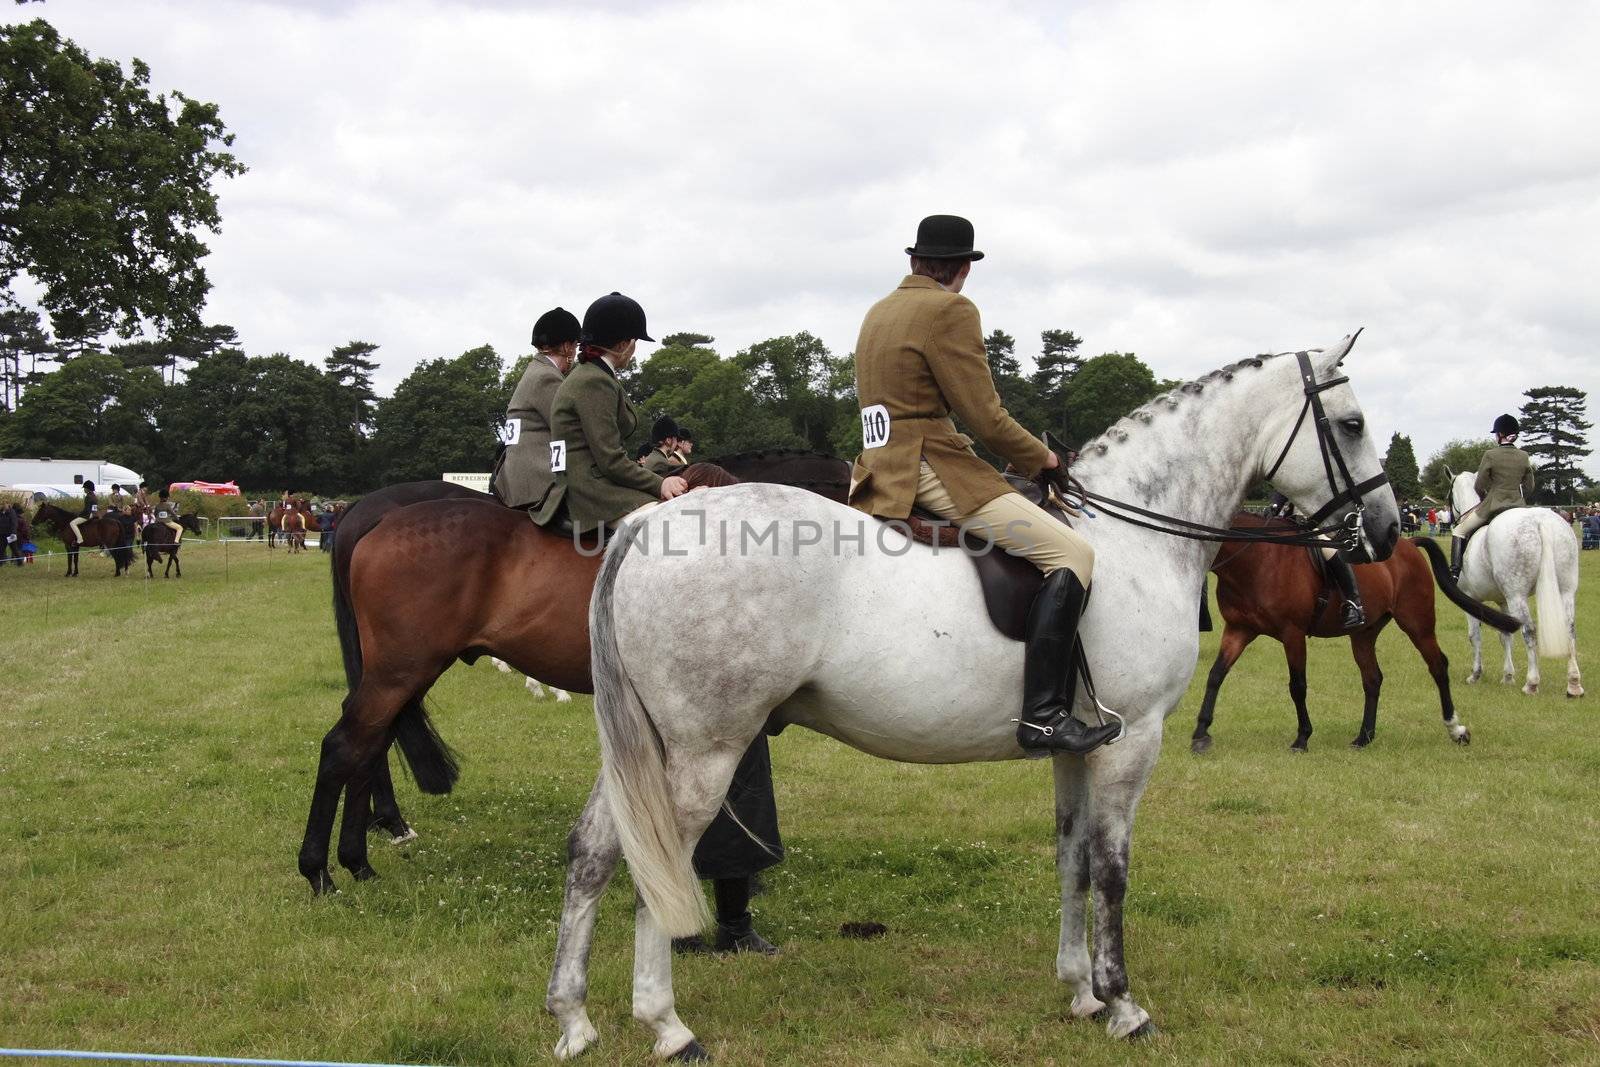 horses and riders waiting to perform at the county show